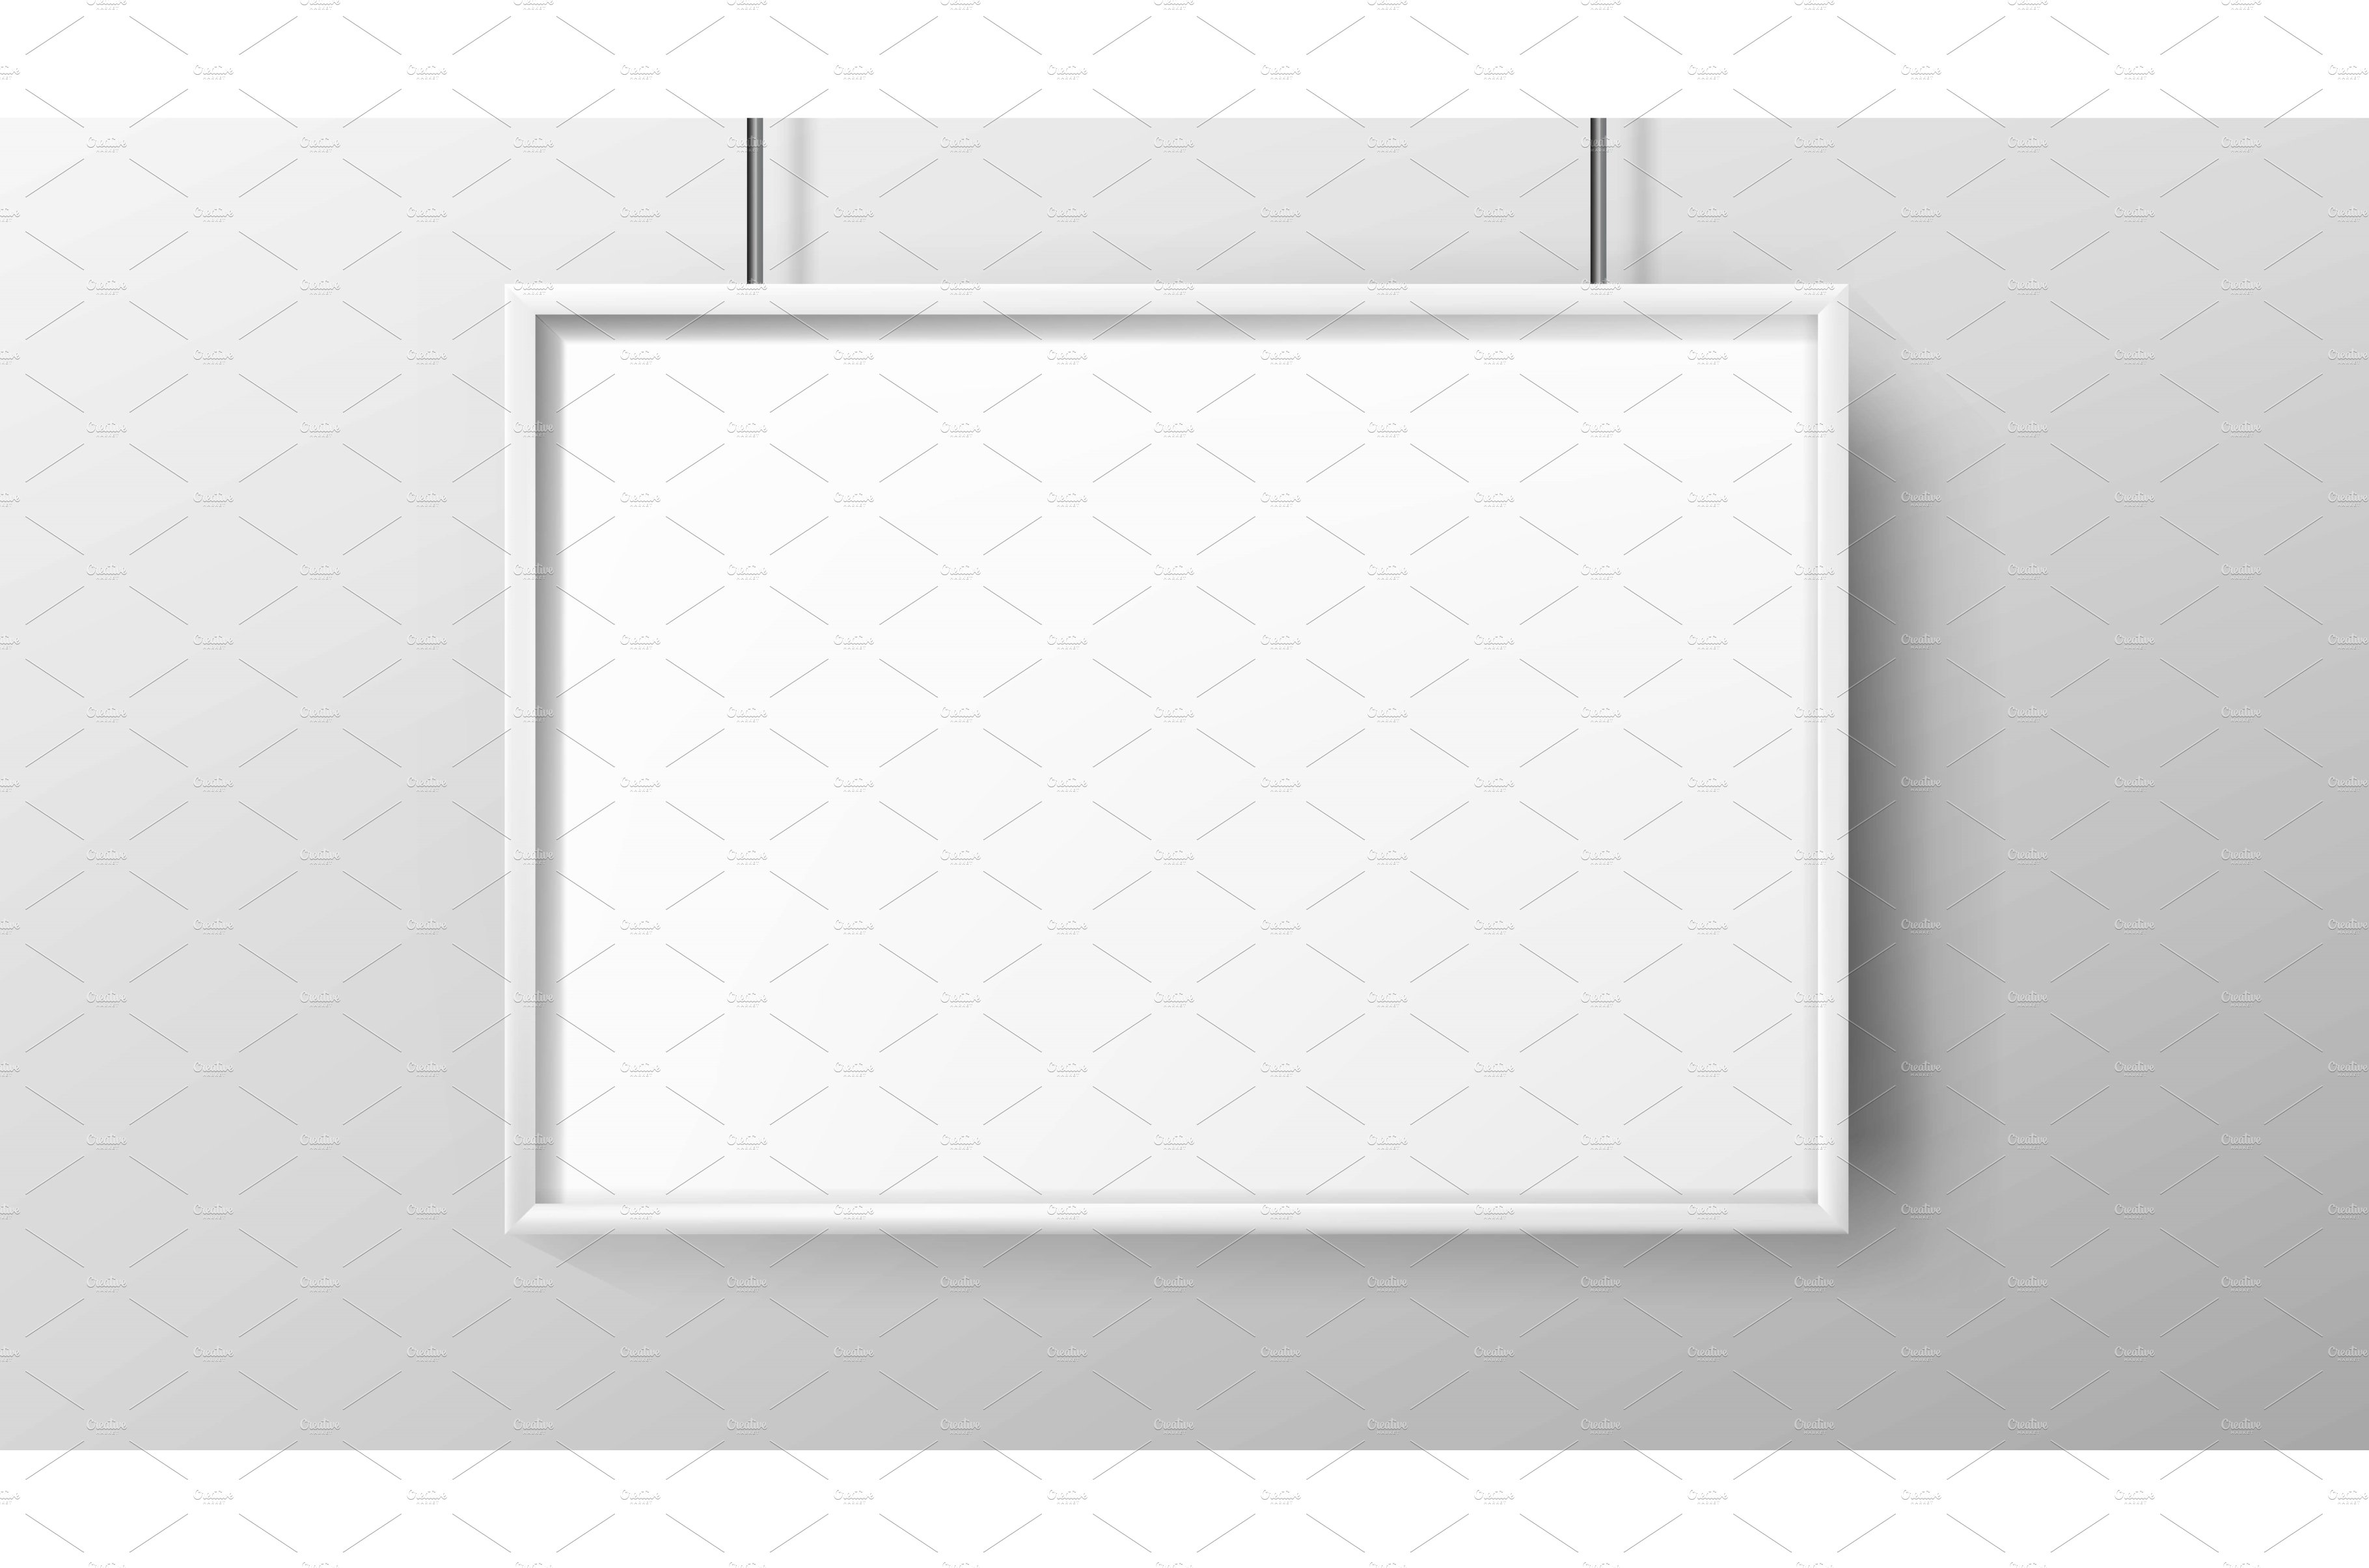 Poster Blank Advertisement Paper cover image.